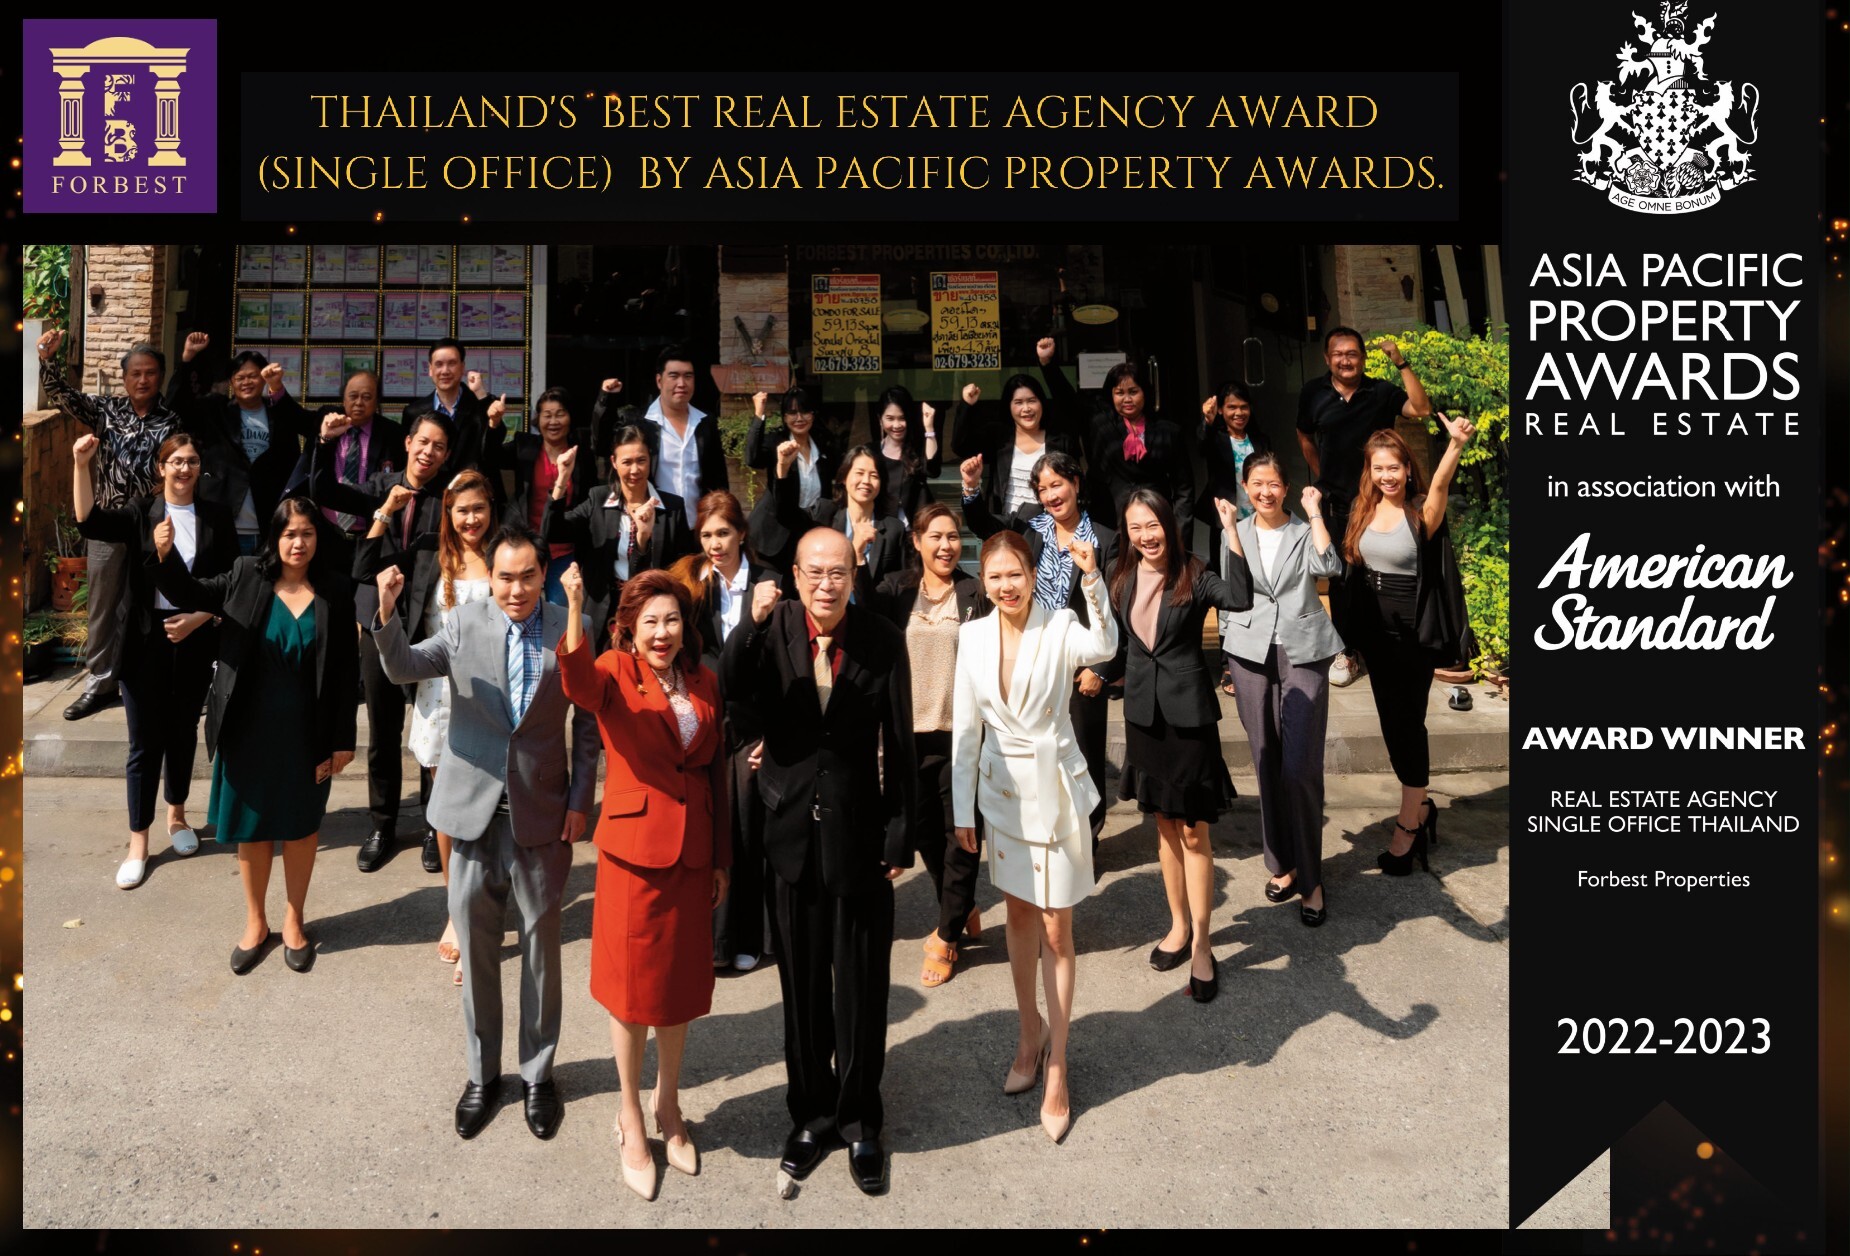 Forbest Properties recognized as "Thailand's Best Real Estate Agency Award"